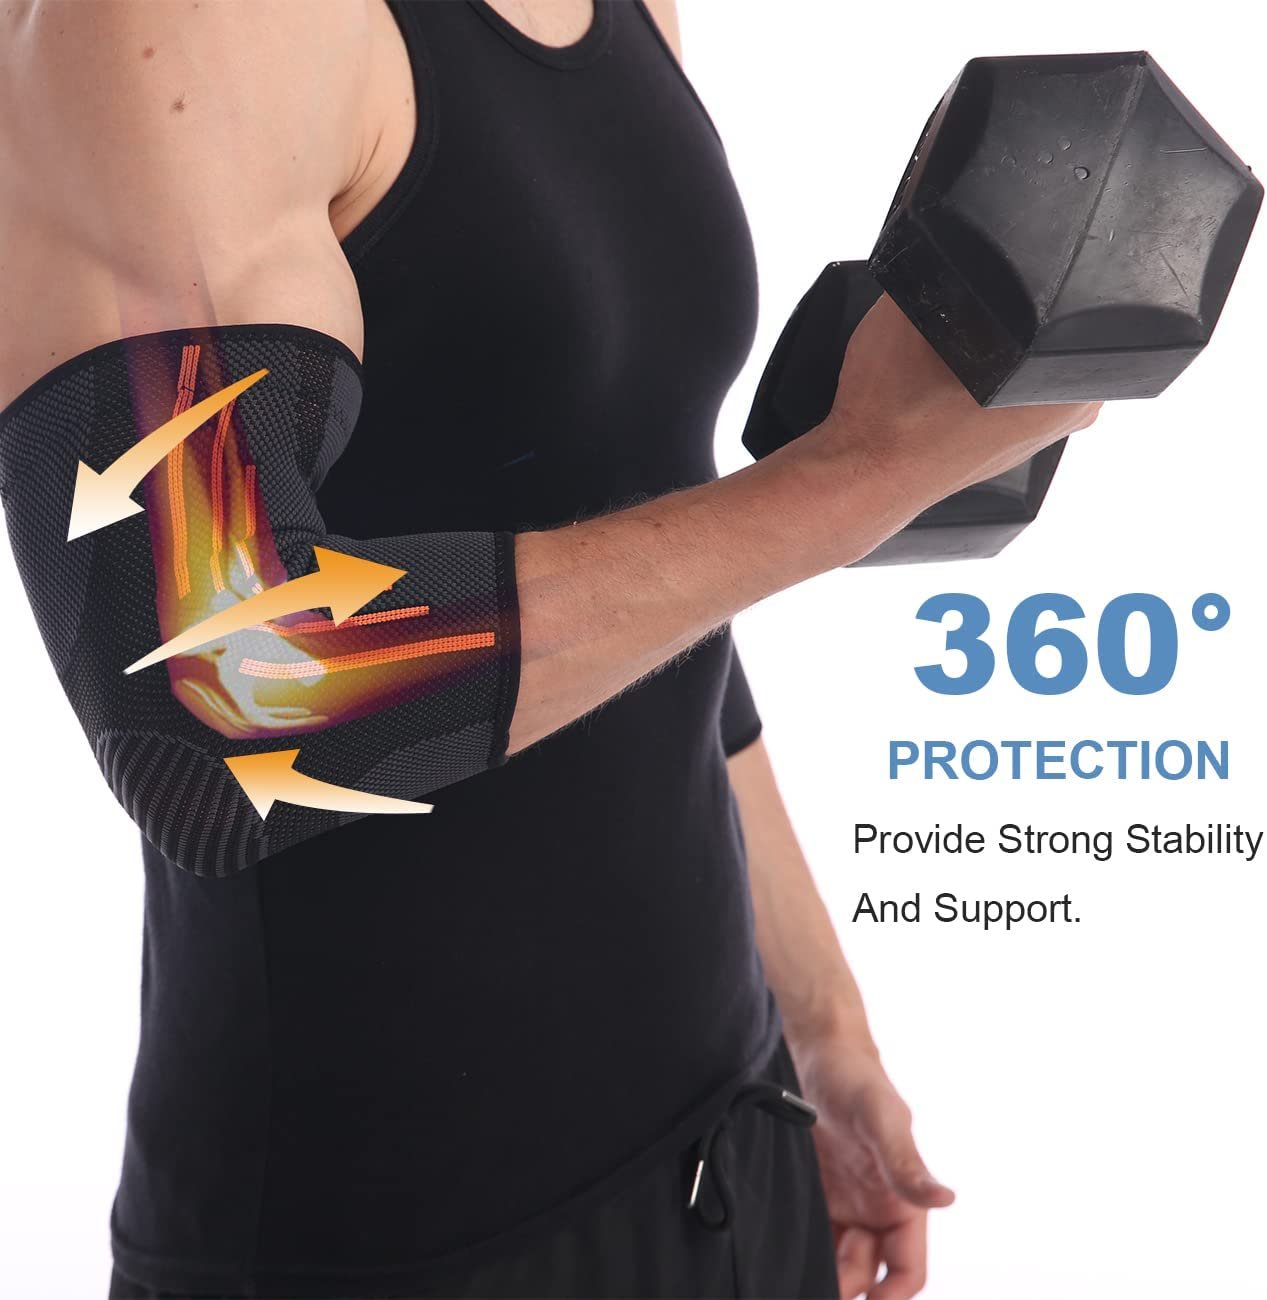 Elbow Supports 2 Pack, Anti-Slip Elbow Support Brace for Men/Women, Breathable Elbow Brace for Joint Pain Relief/Arthritis/Recovery, Elbow Compression